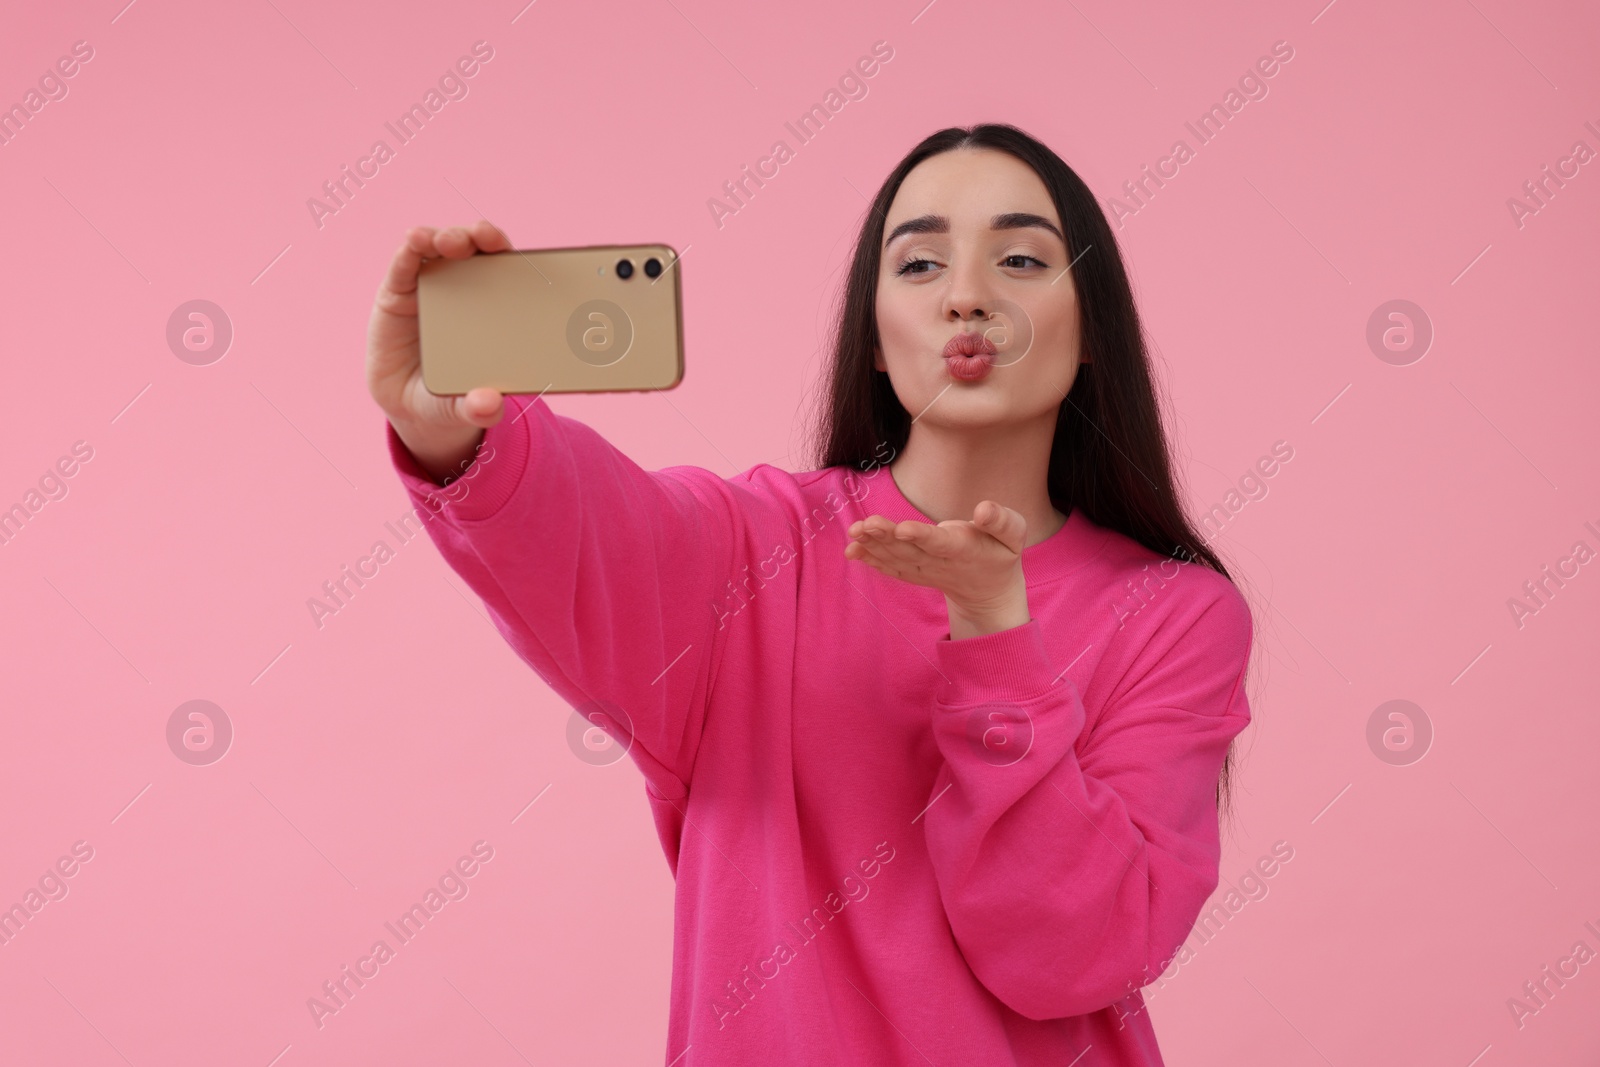 Photo of Young woman taking selfie with smartphone and blowing kiss on pink background